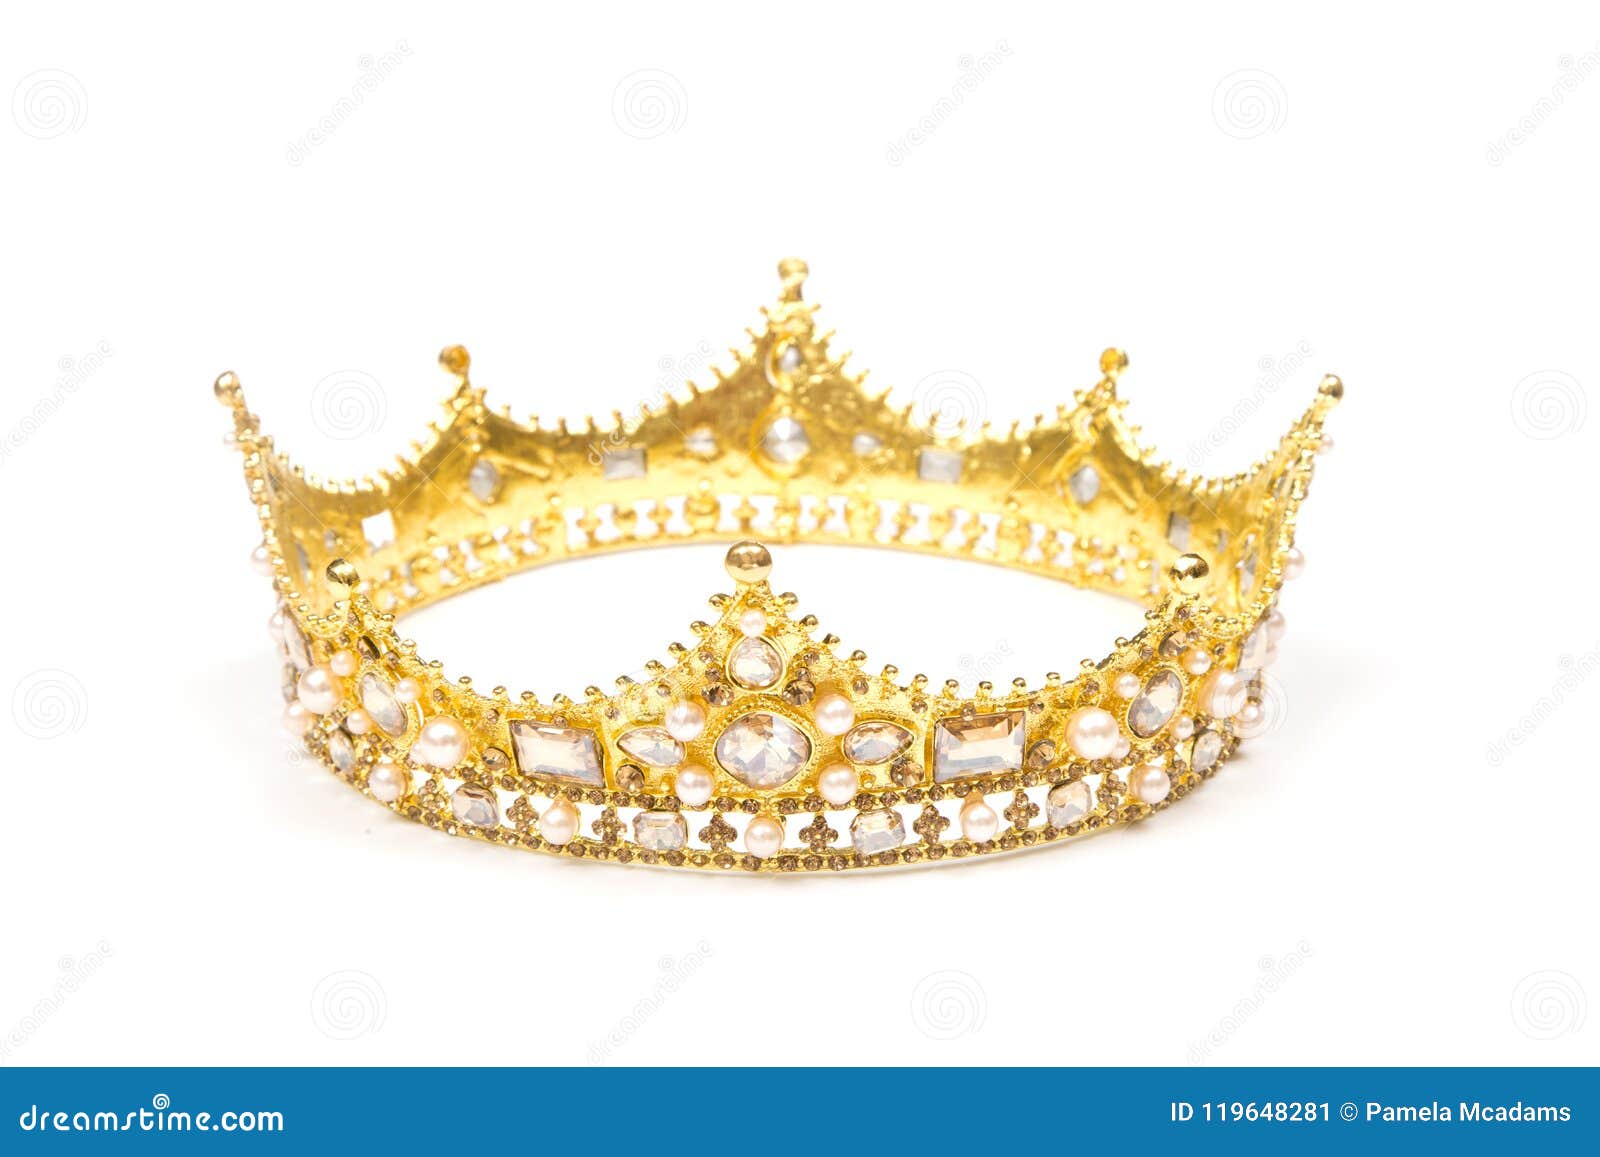 a king or queens crown